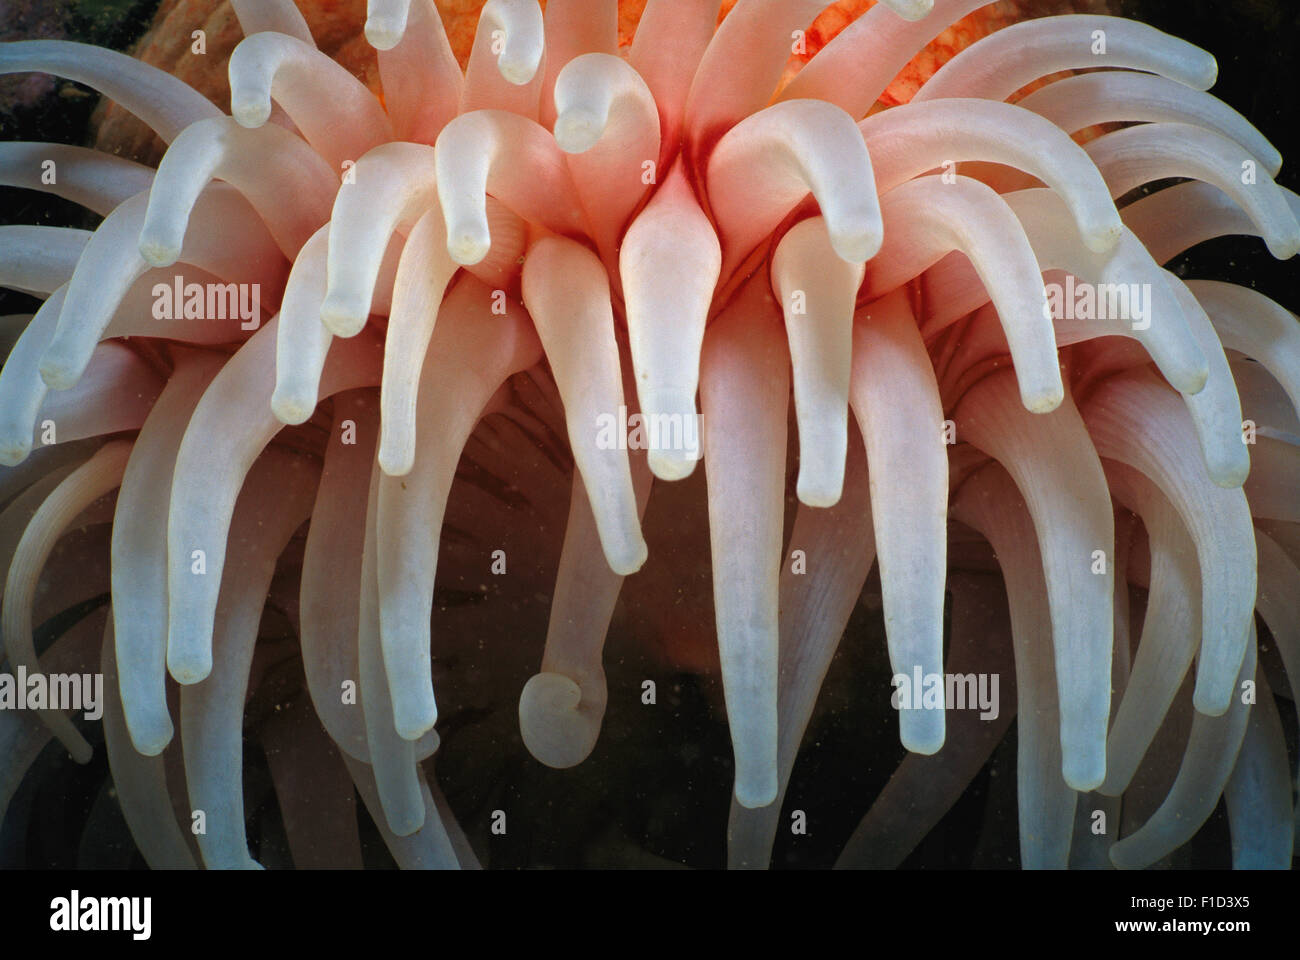 Tentacles of Northern Red Anemone (Tealia crassicornis or Urticina felina), open and trapping plankton, Deer Island, Bay of Fund Stock Photo